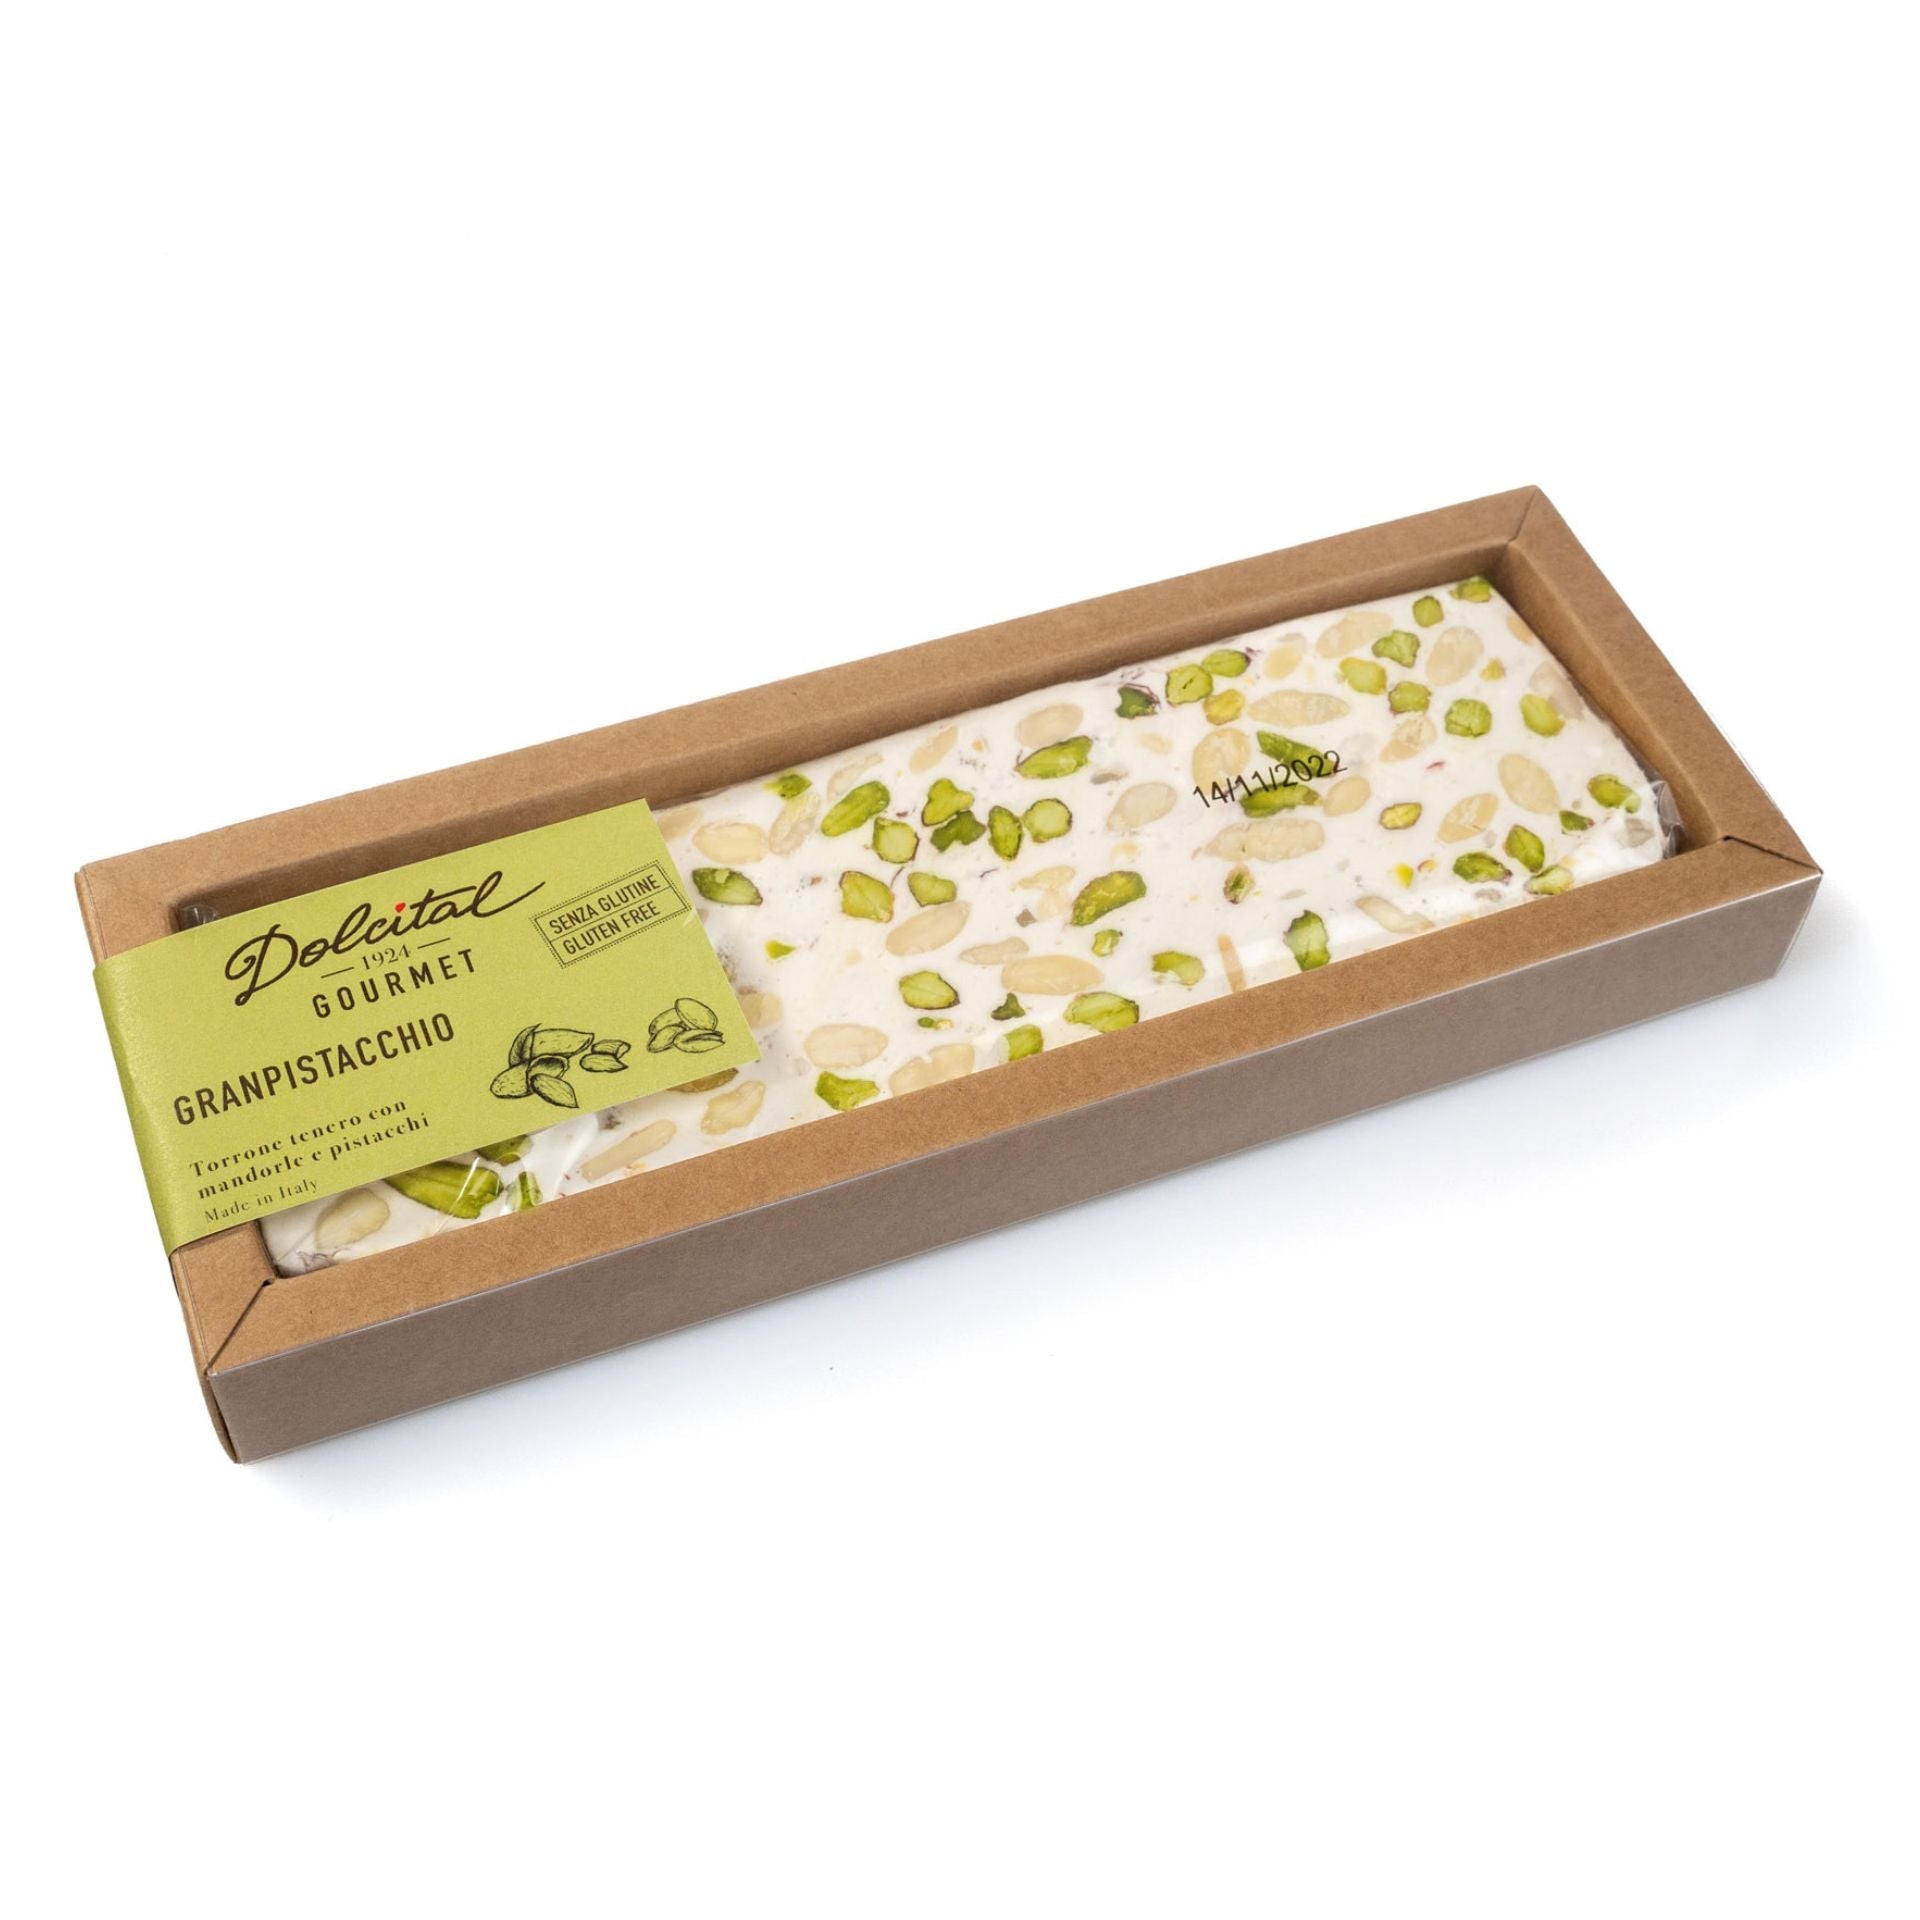 Dolcital Gourmet Soft Nougat with Pistachio & Almonds 180g Feast Italy